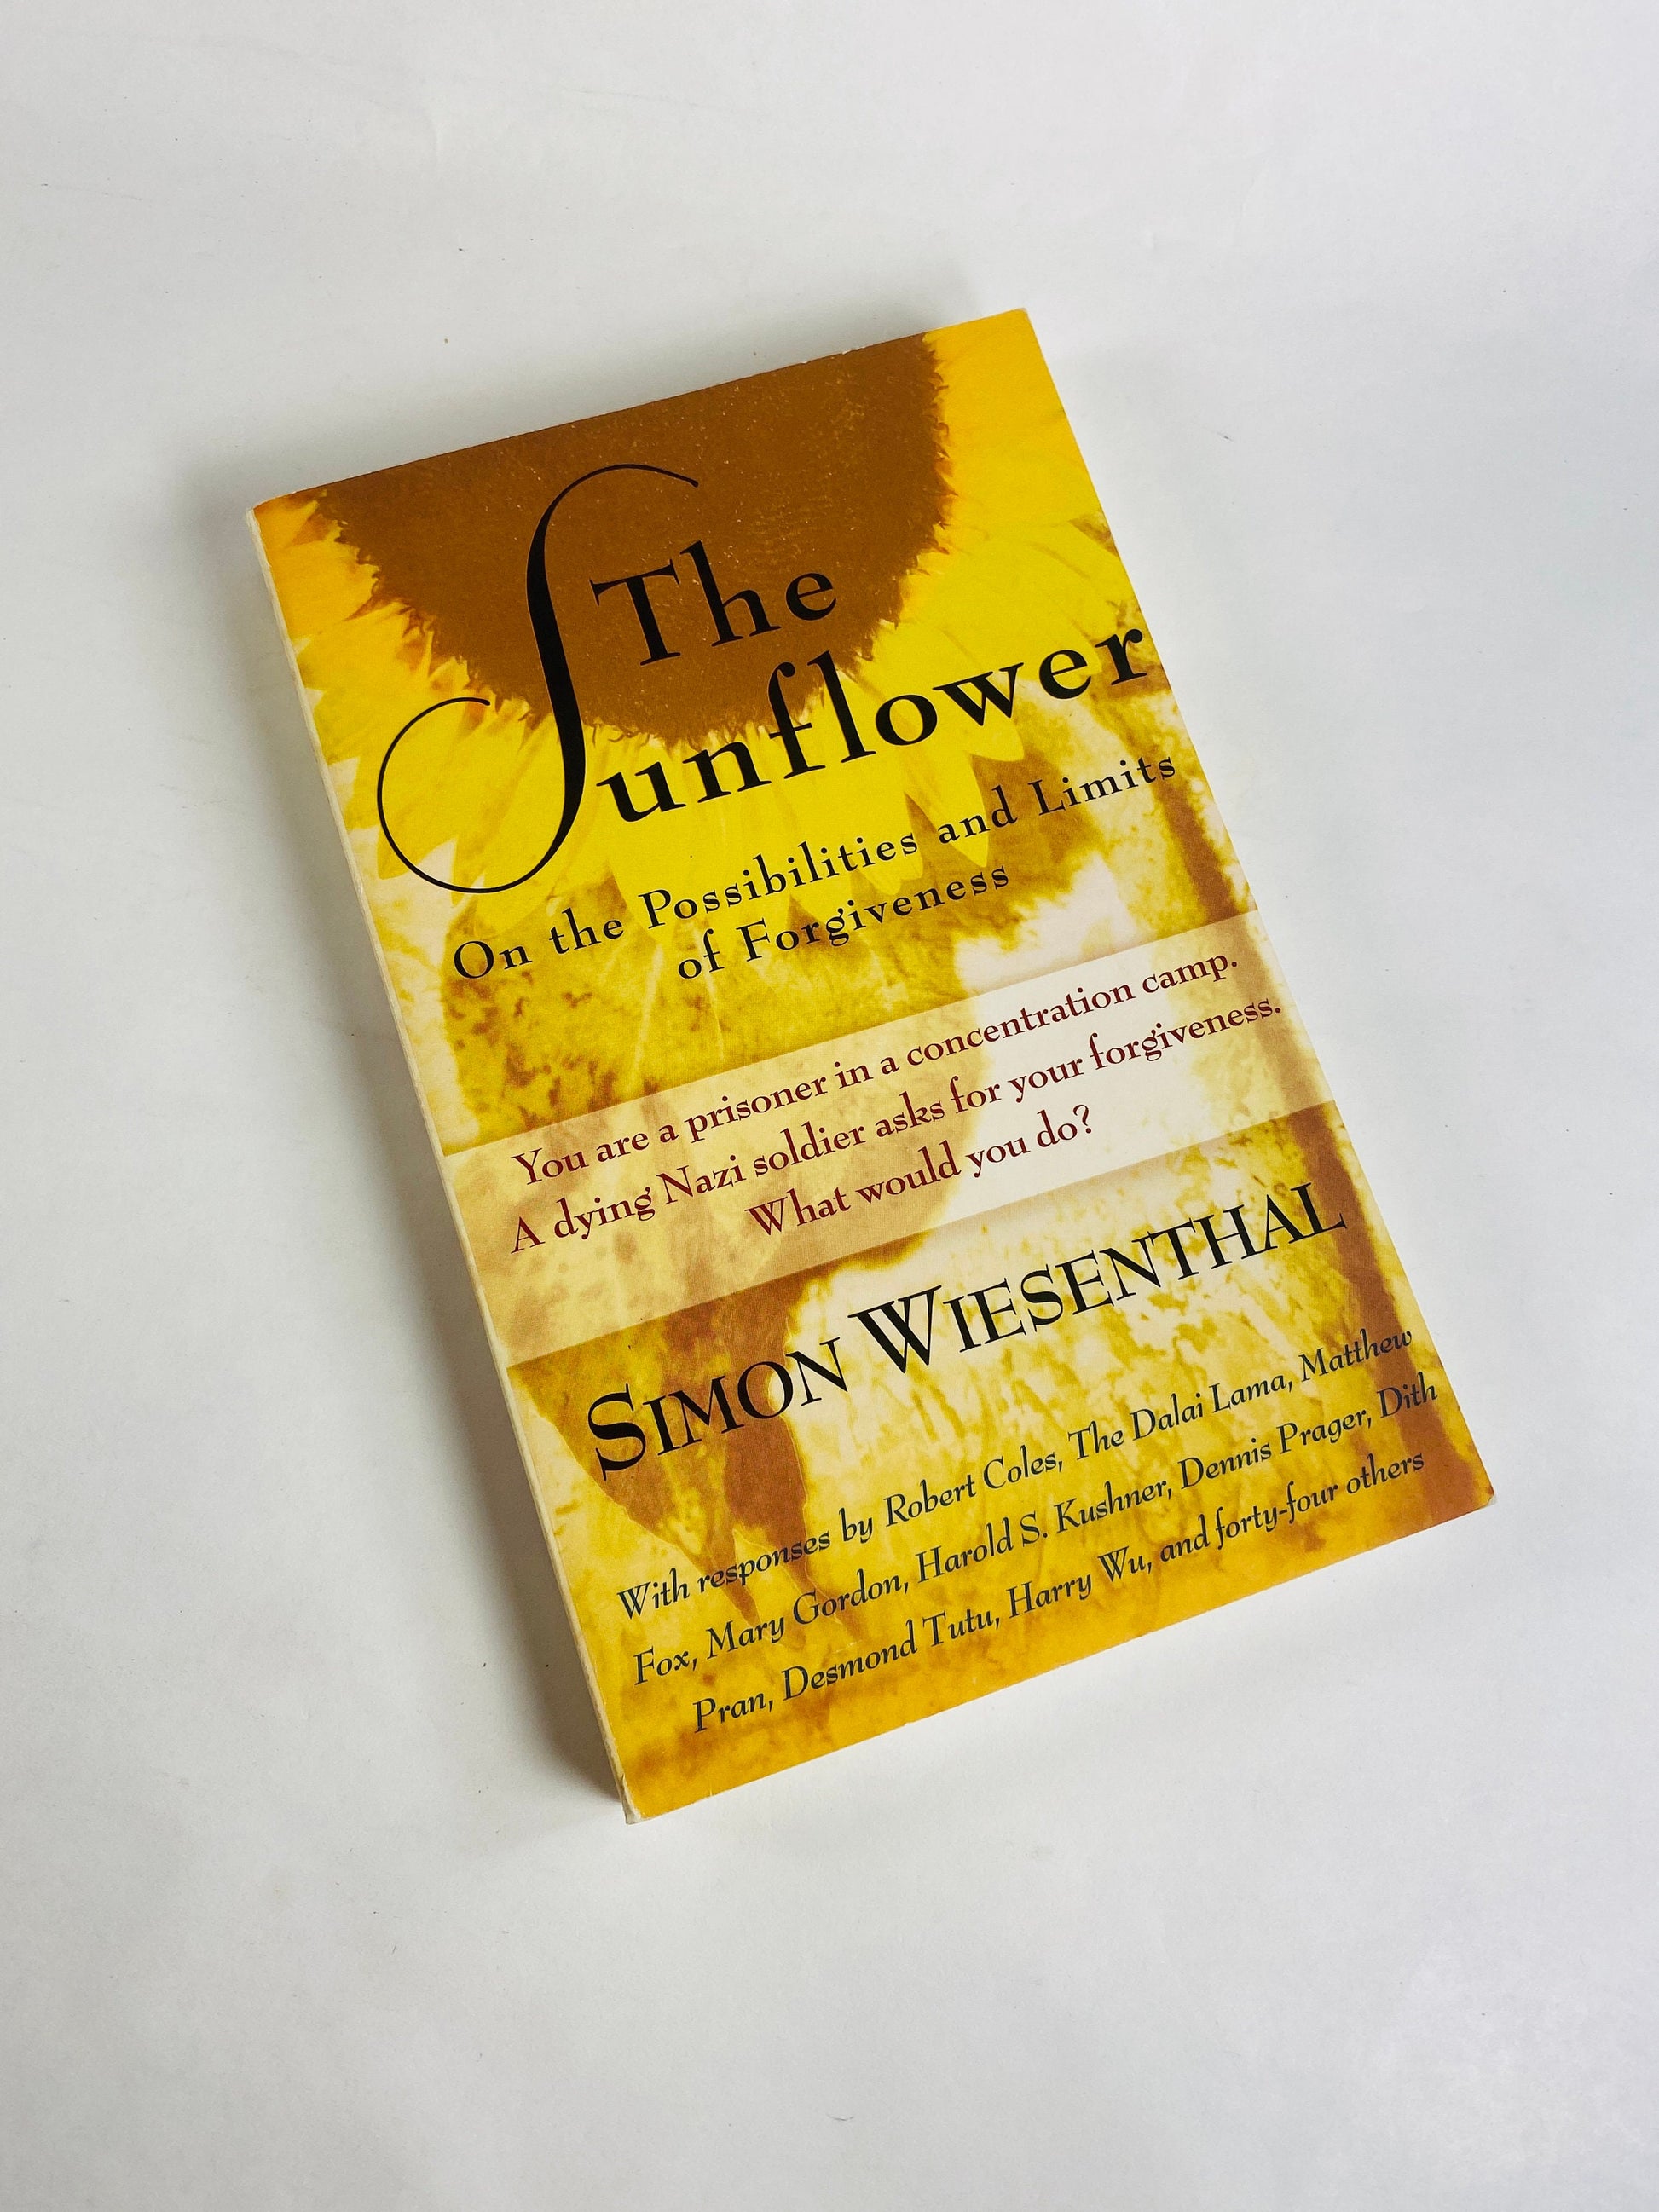 Simon Wiesenthal The Sunflower vintage paperback book Dying Nazi soldier asks for Holocaust forgiveness Rabbinical letters